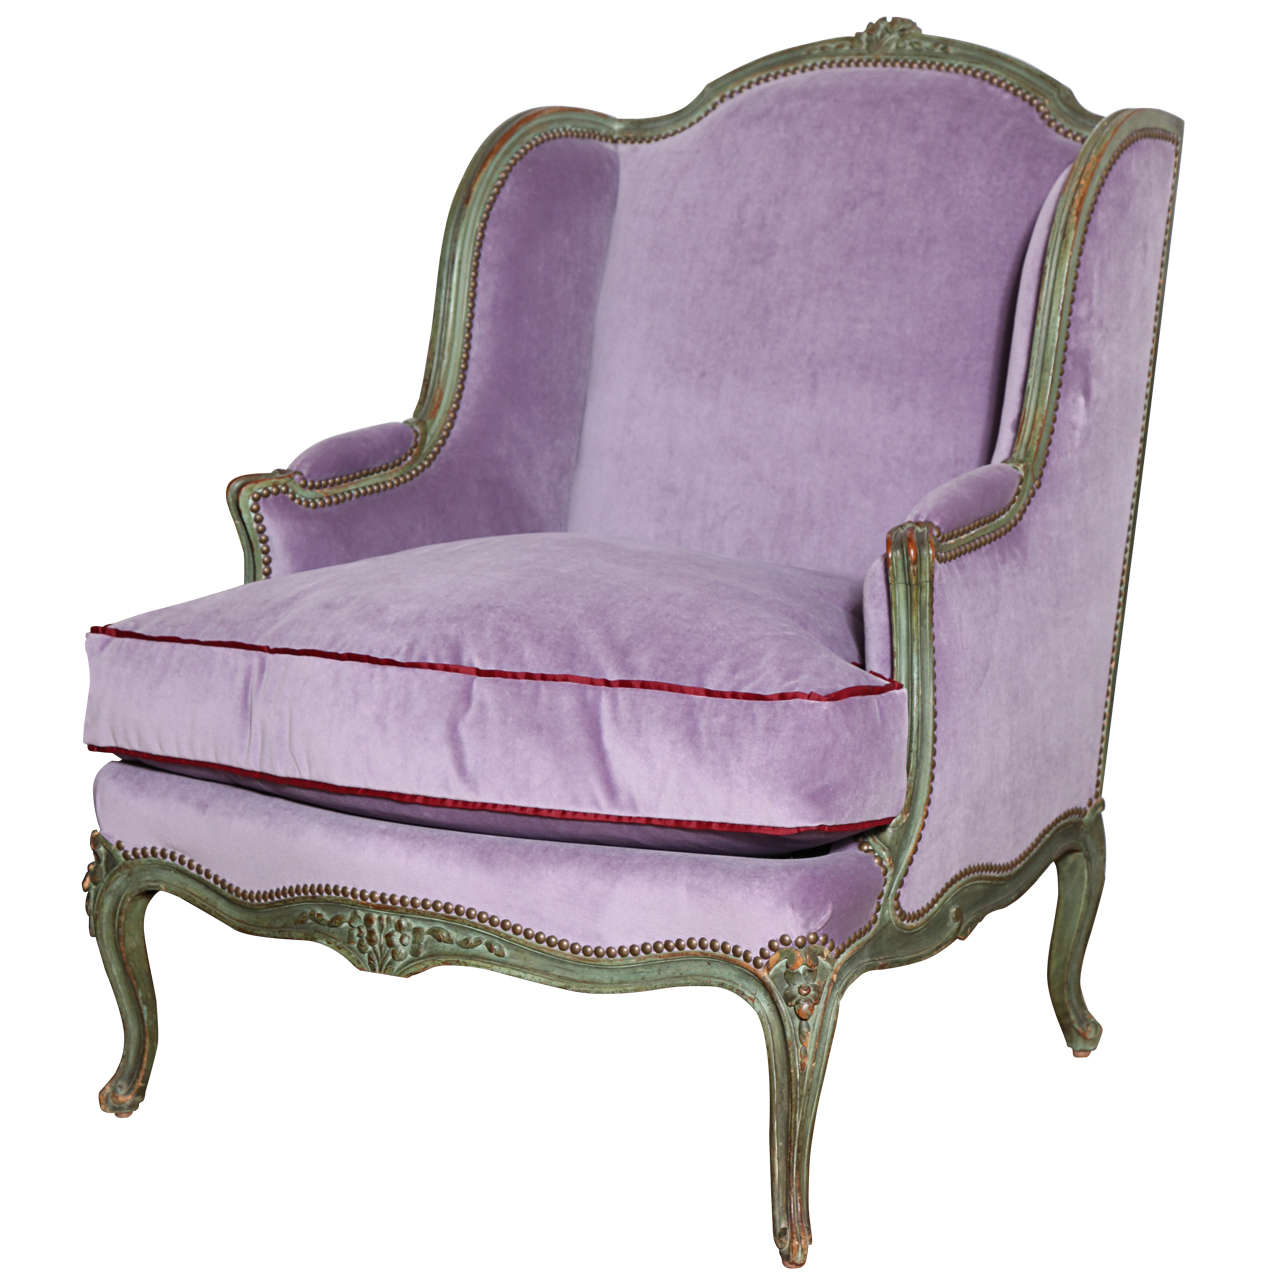 A Carved and Painted Large Louis XV Style Bergere, Mid 18th Century